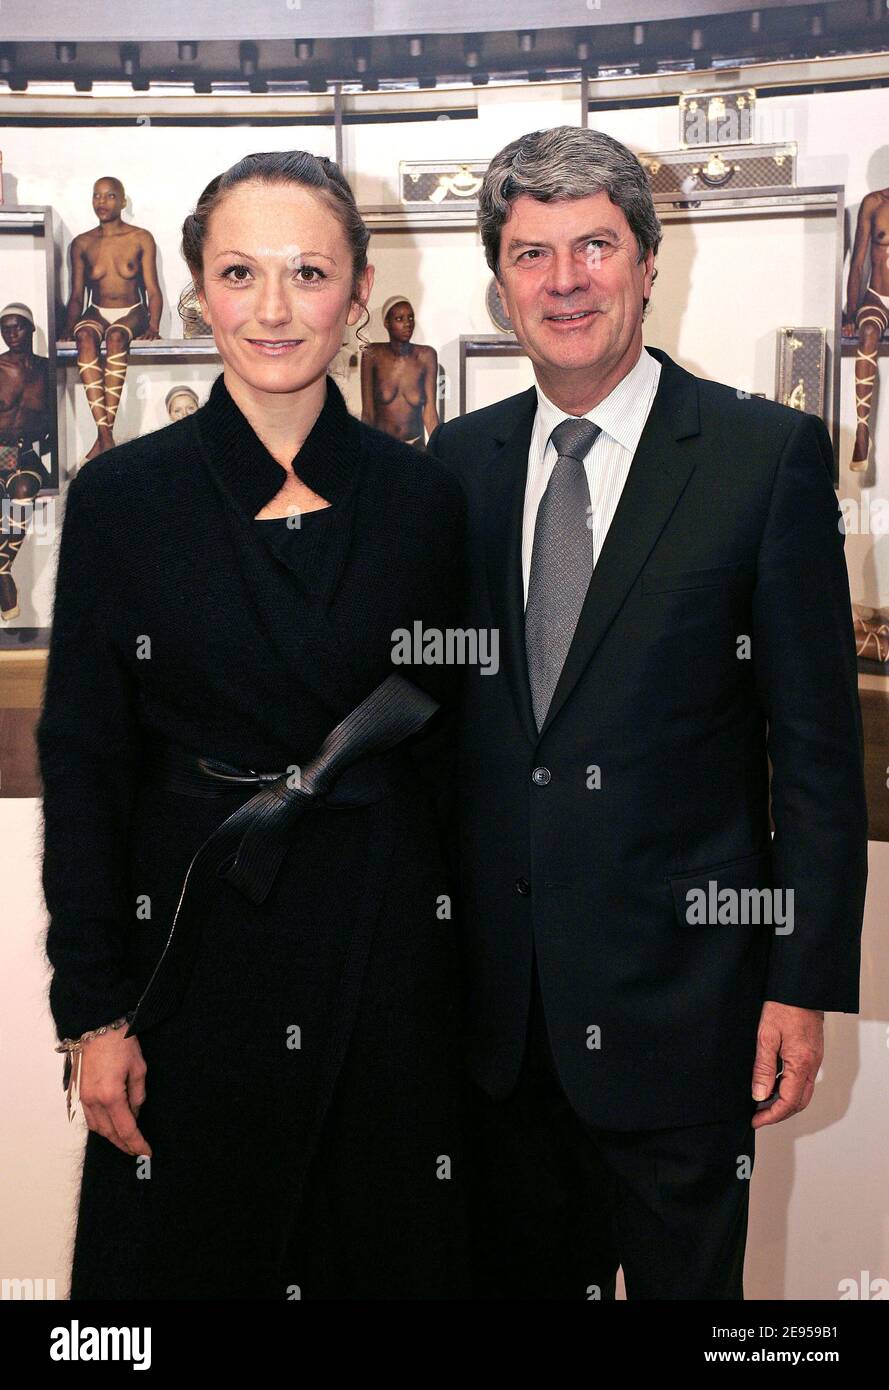 Chairman Ceo French Conglomerate Lvmh Moet Hennessy Louis Vuitton Bernard –  Stock Editorial Photo © ChinaImages #244135364